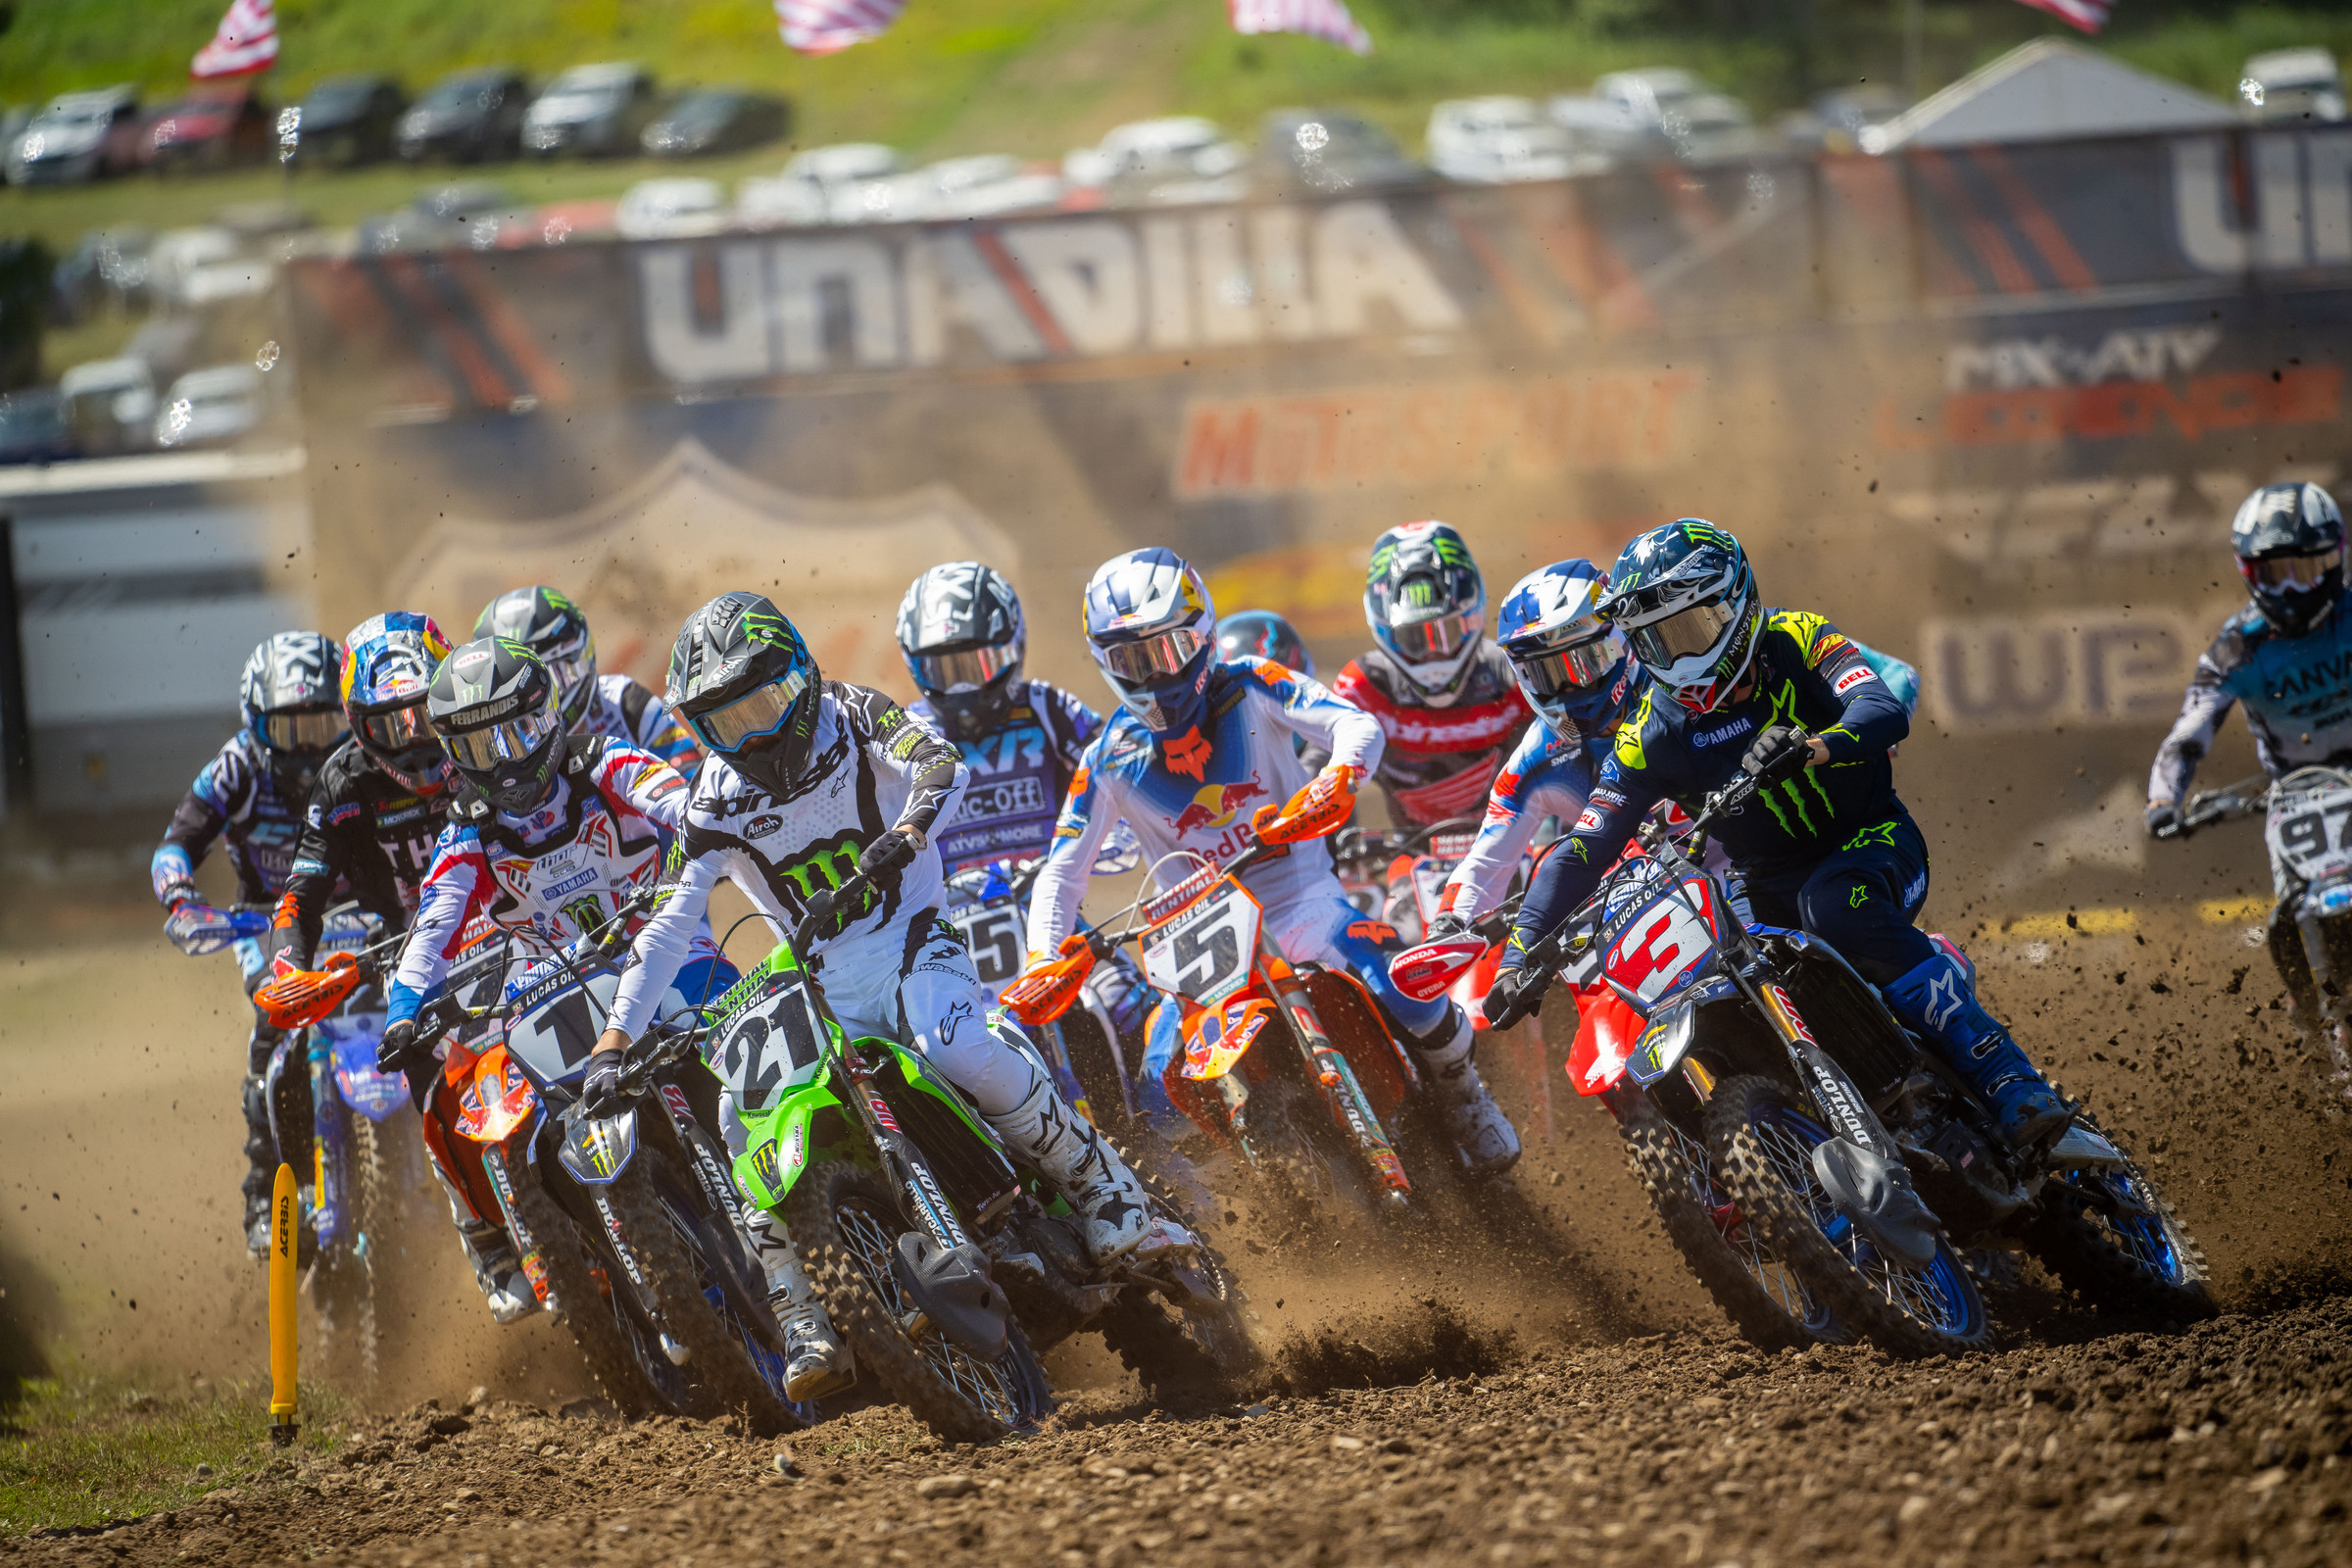 Are You Good At What is motocross? Here's A Quick Quiz To Find Out